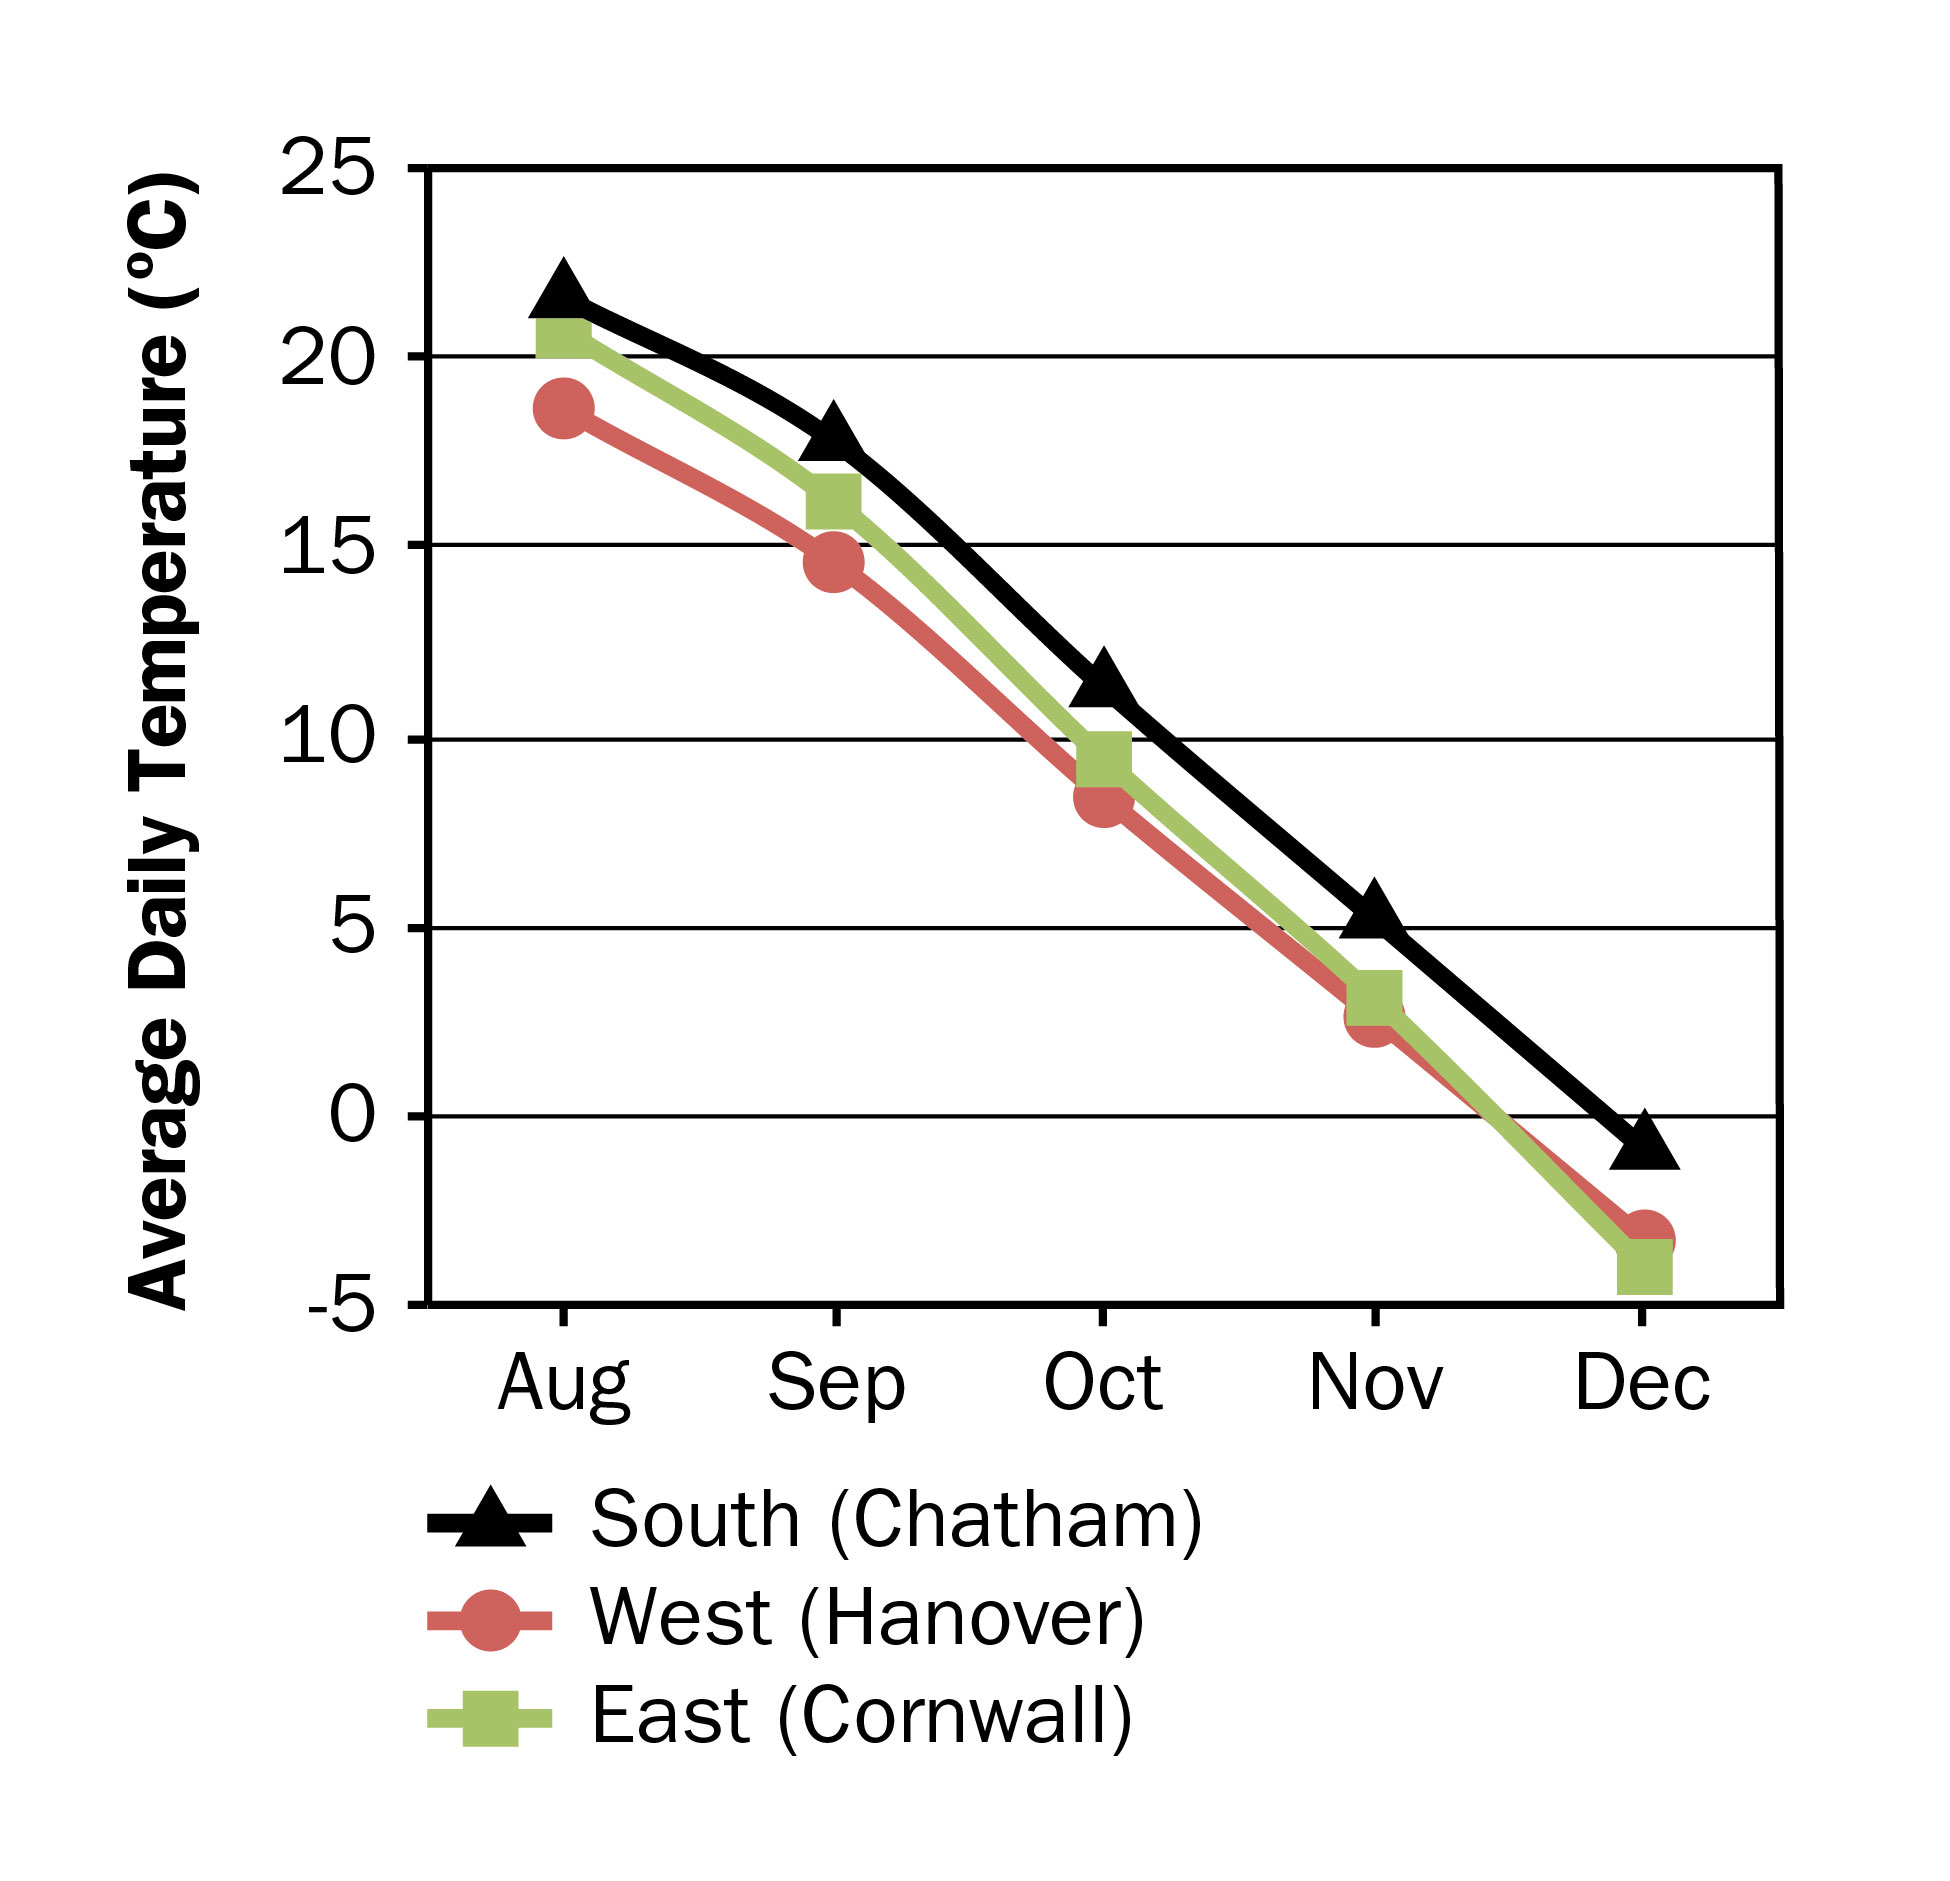 Average monthly ambient air temperatures from August through December for Chatham, Hanover and Cornwall, Ontario